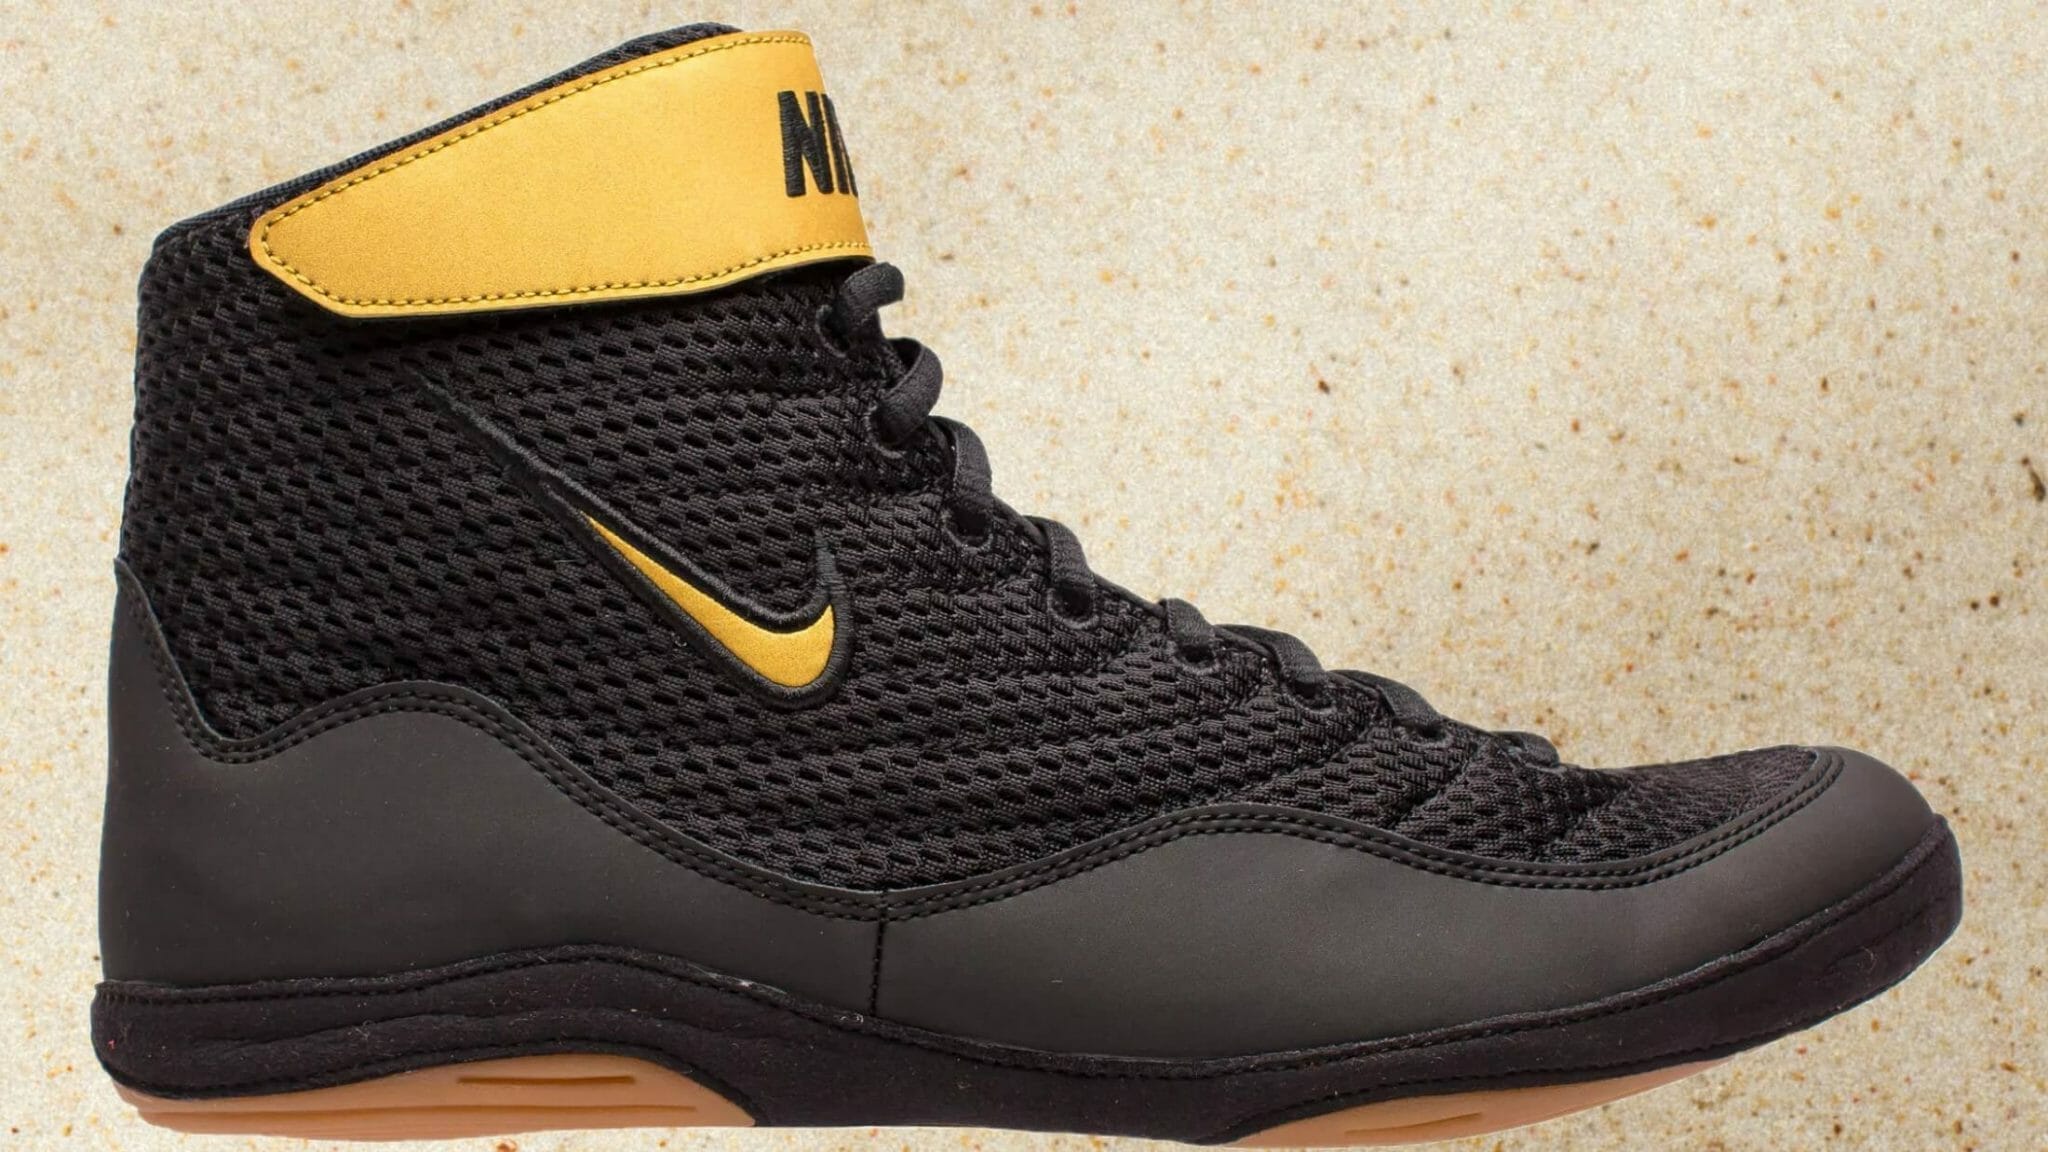 Black and Gold Nike Inflict 3.